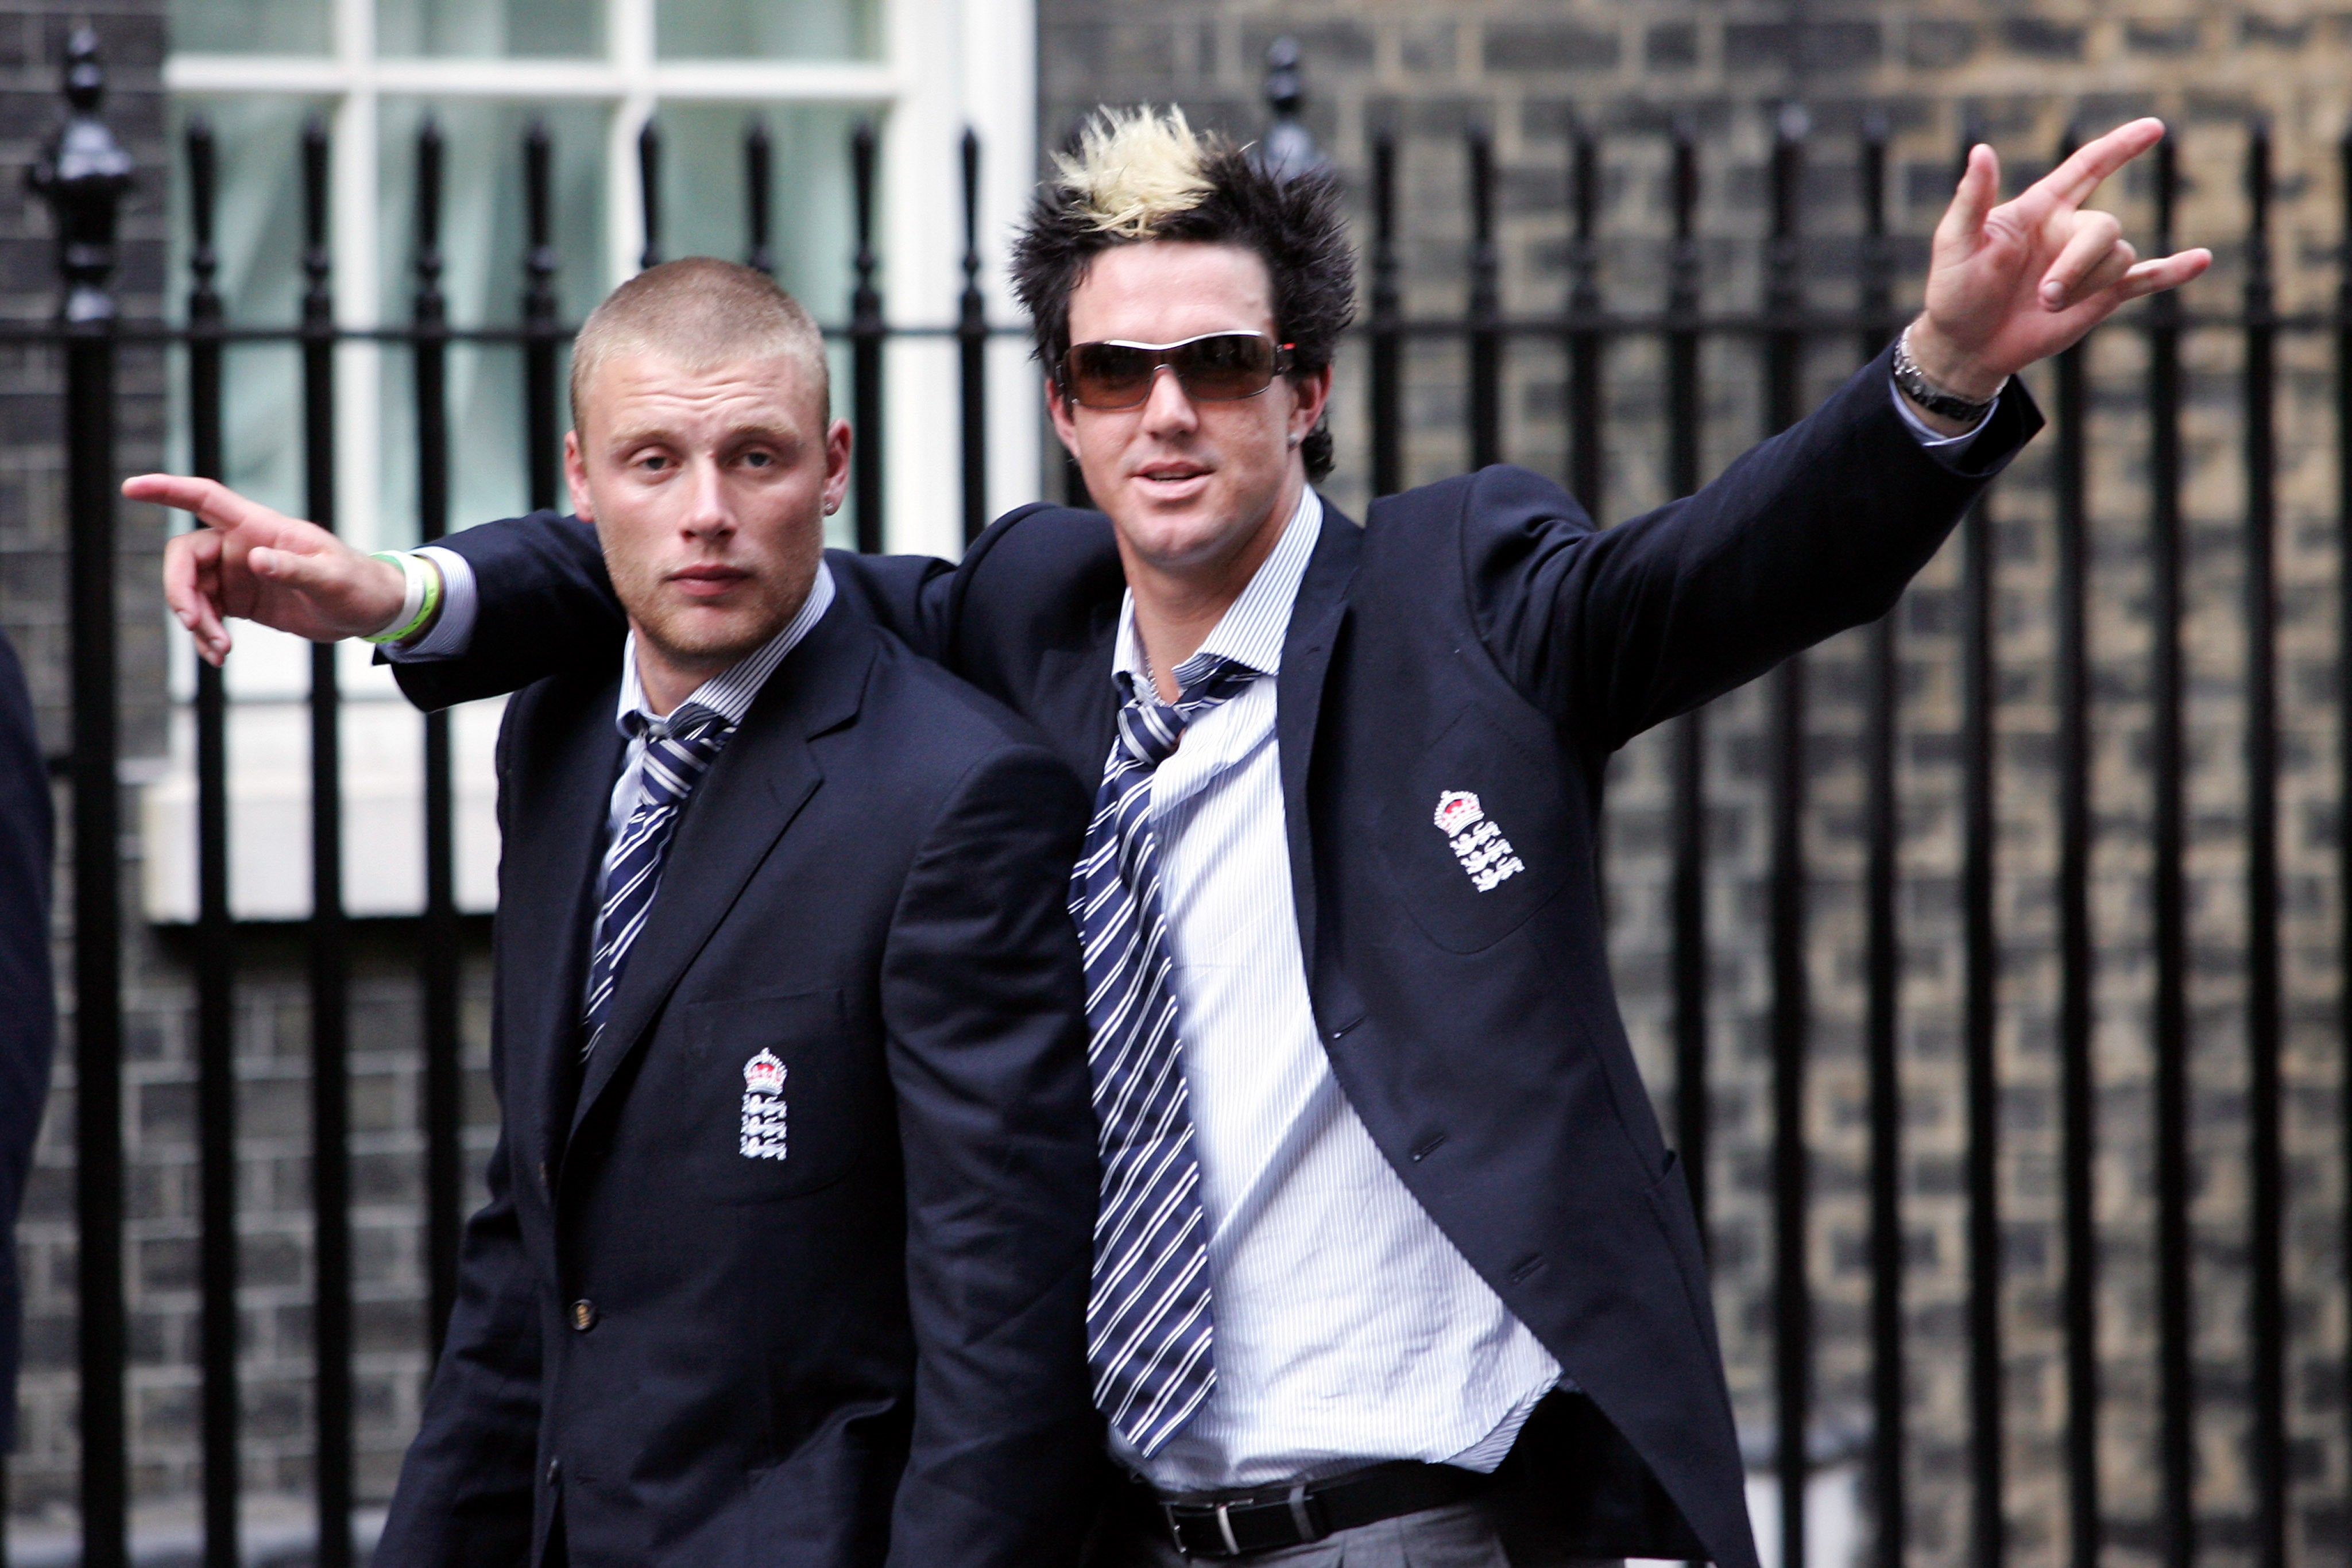 England cricketers Andrew Flintoff, left, and Kevin Pietersen arrive at Downing Street following the Ashes victory parade in London in 2005 (Mark Lees/PA)